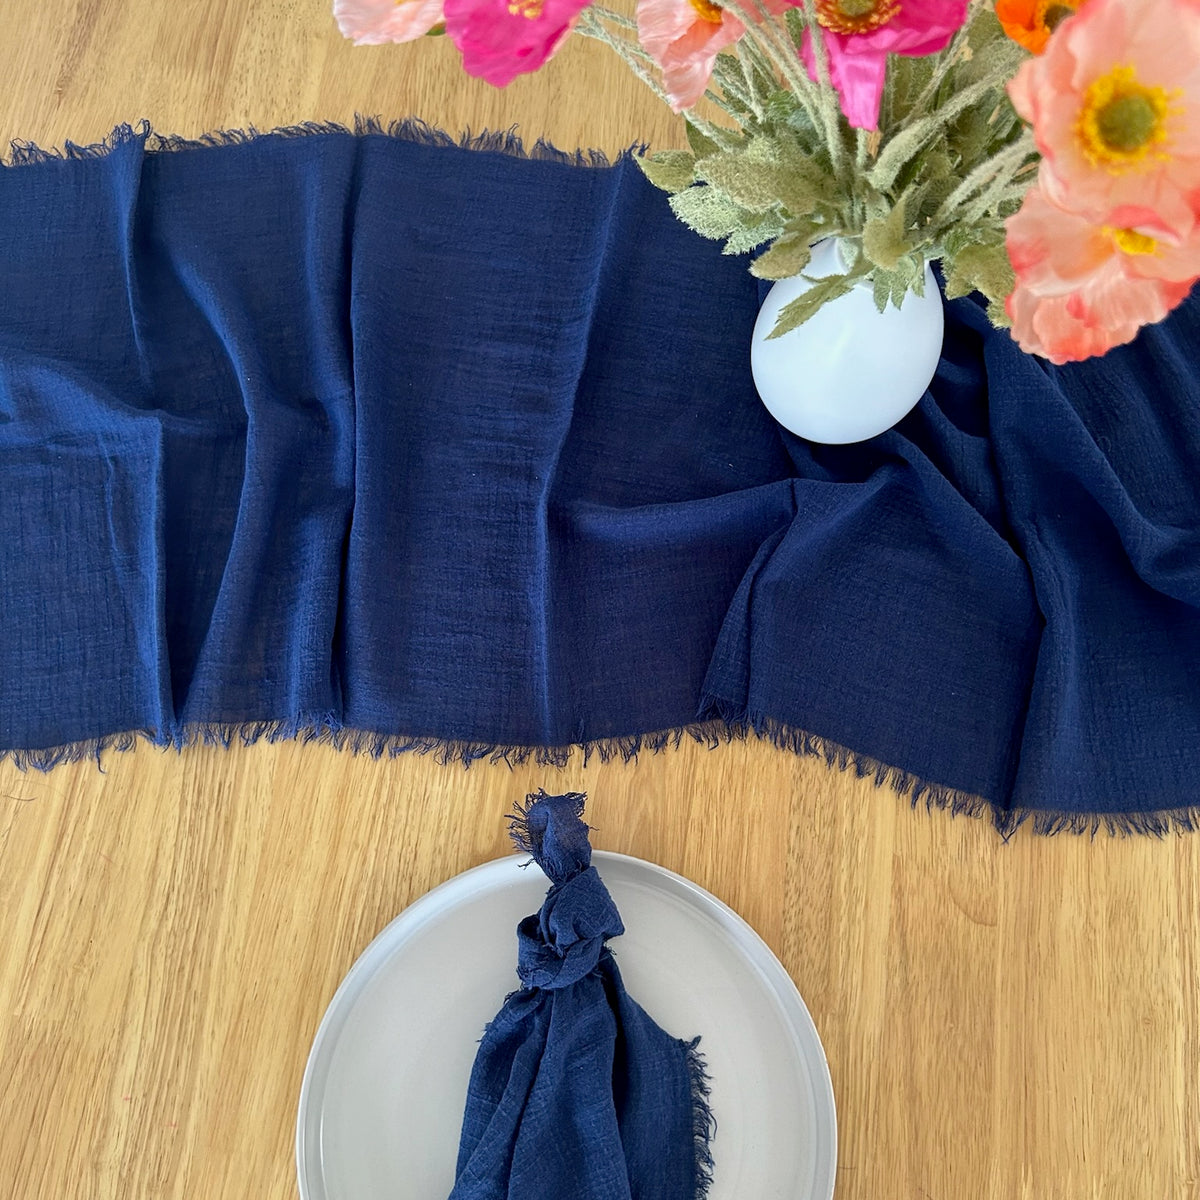 Navy Blue Rustic Cotton Table Runners - 3m